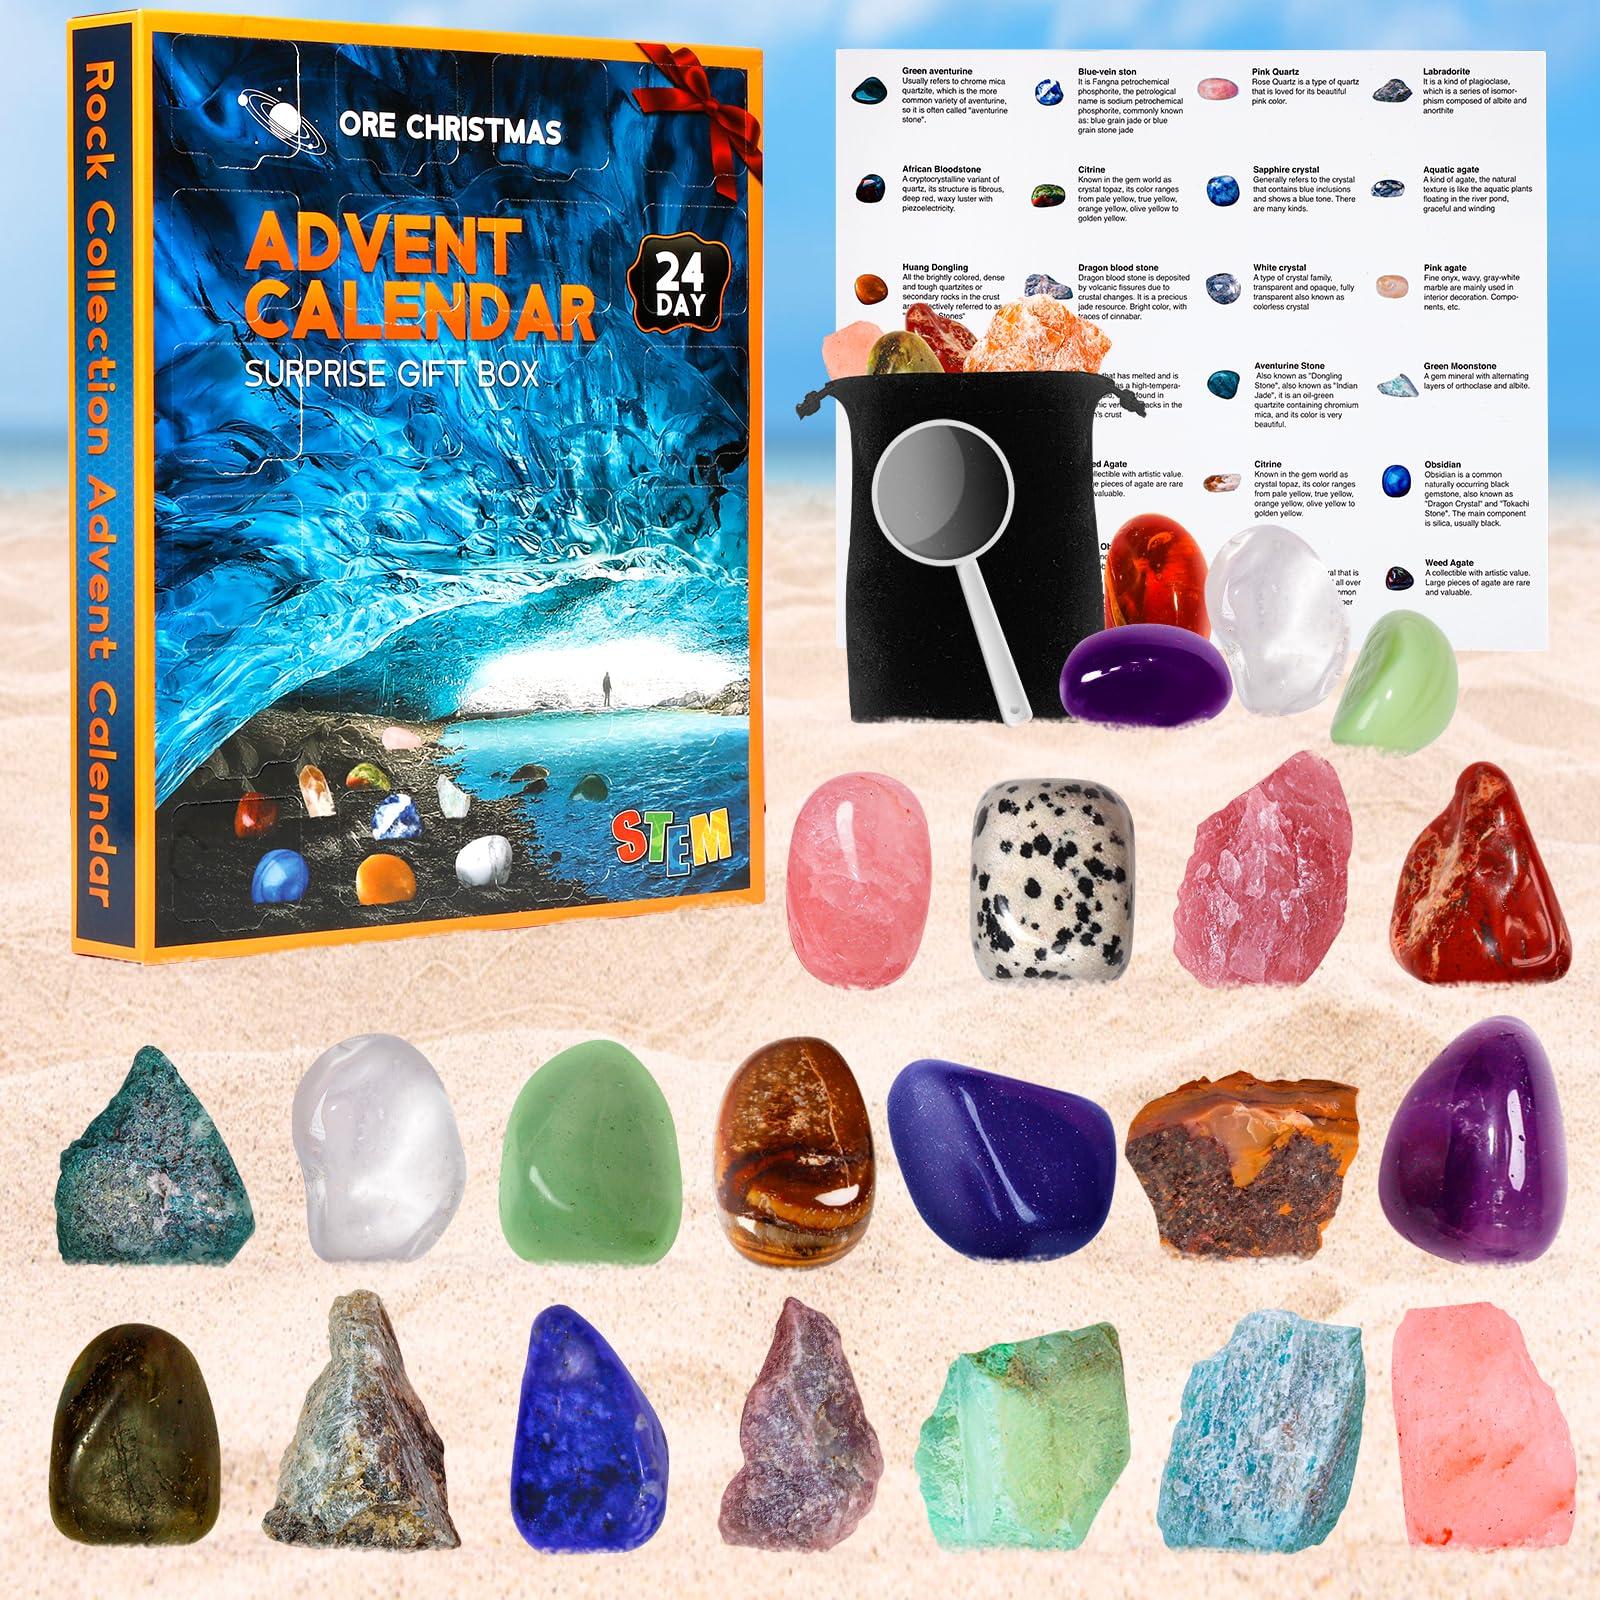 Gemstone Advent Calendar 2023 For Kids, 24 Days Christmas Countdown Calender, Crystals, Natural Rock Stones and Minerals, Christmas Gifts for Girls Boys and Geology Enthusiasts